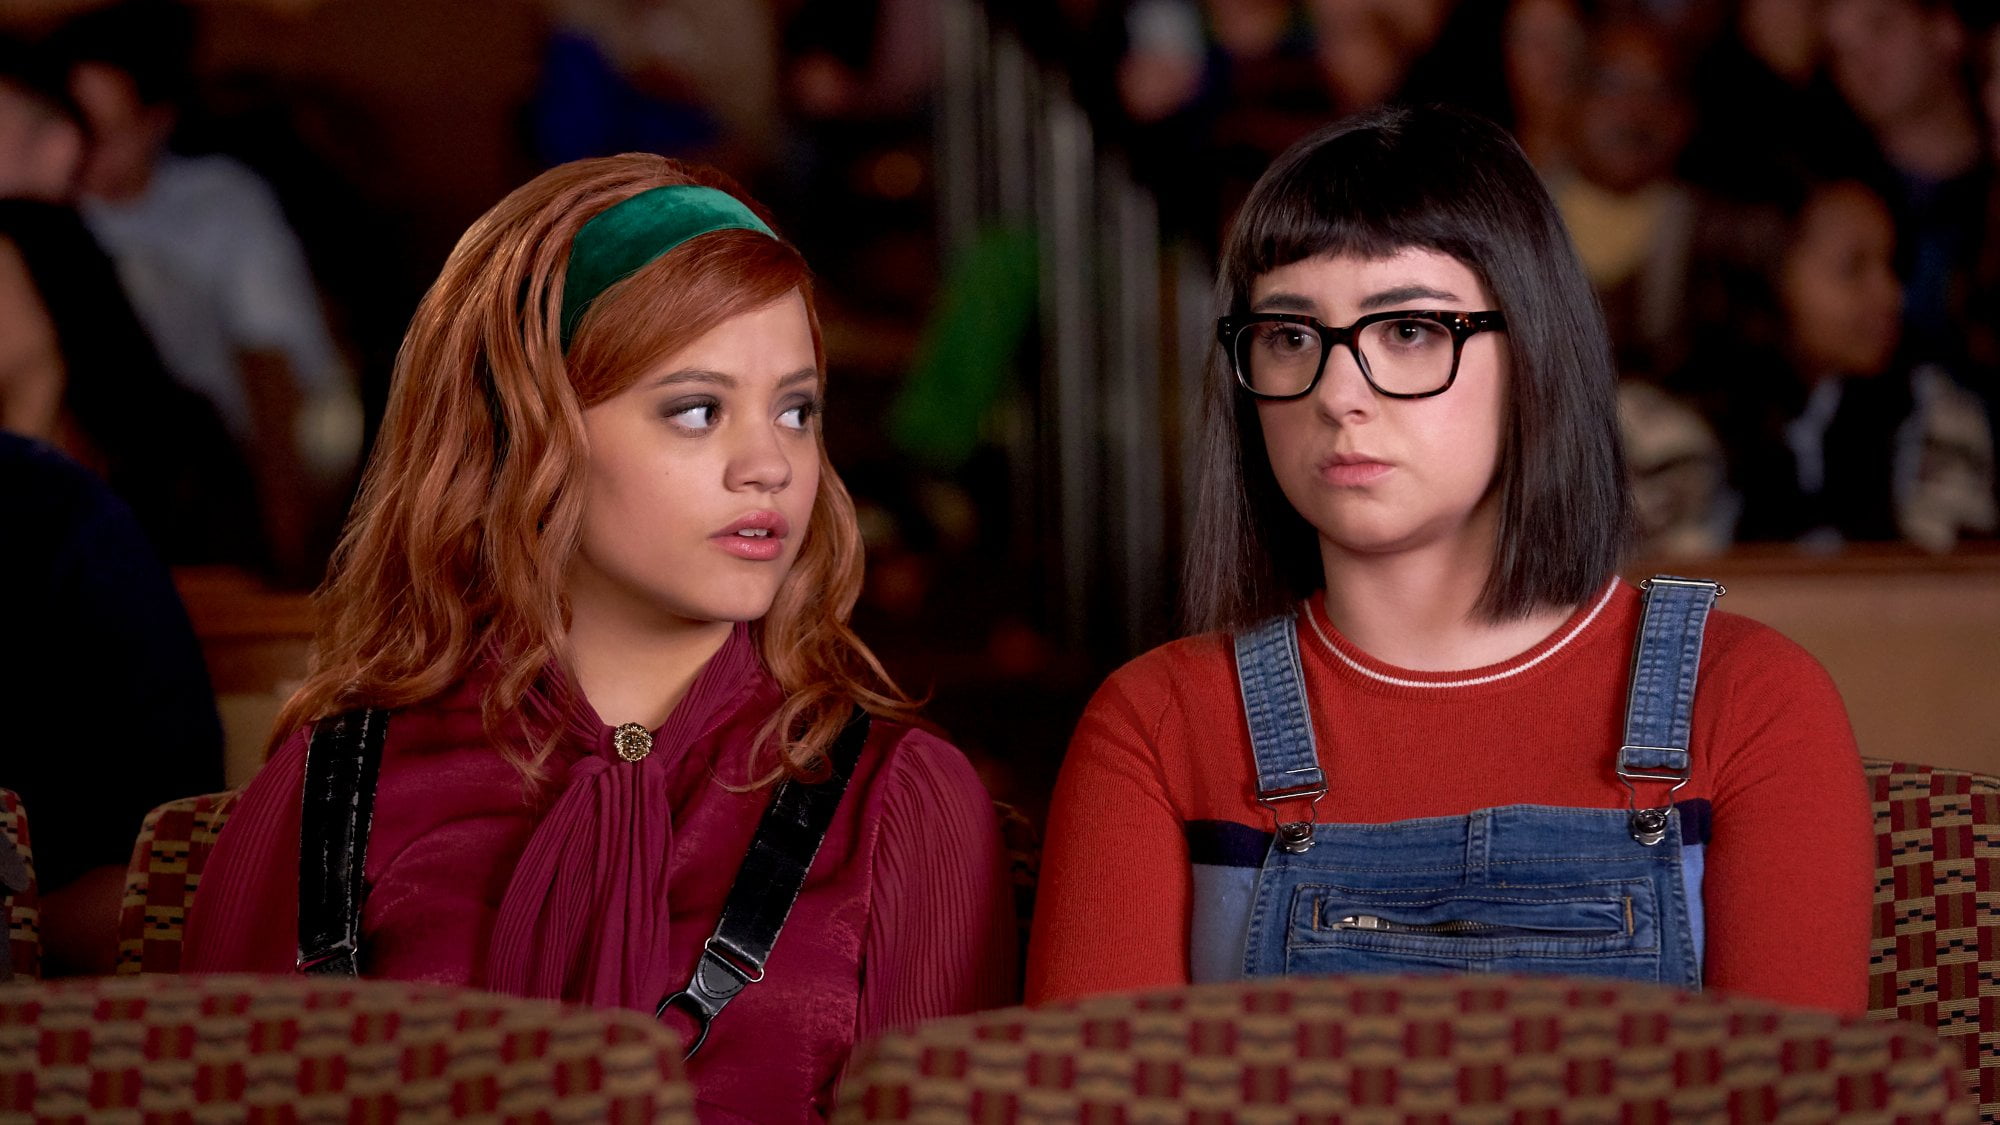 Daphne And Velma': 'Scooby-Doo' Duo's Live-Action Origin Tale Set From WB's  Blue Ribbon Content & Blondie Girl